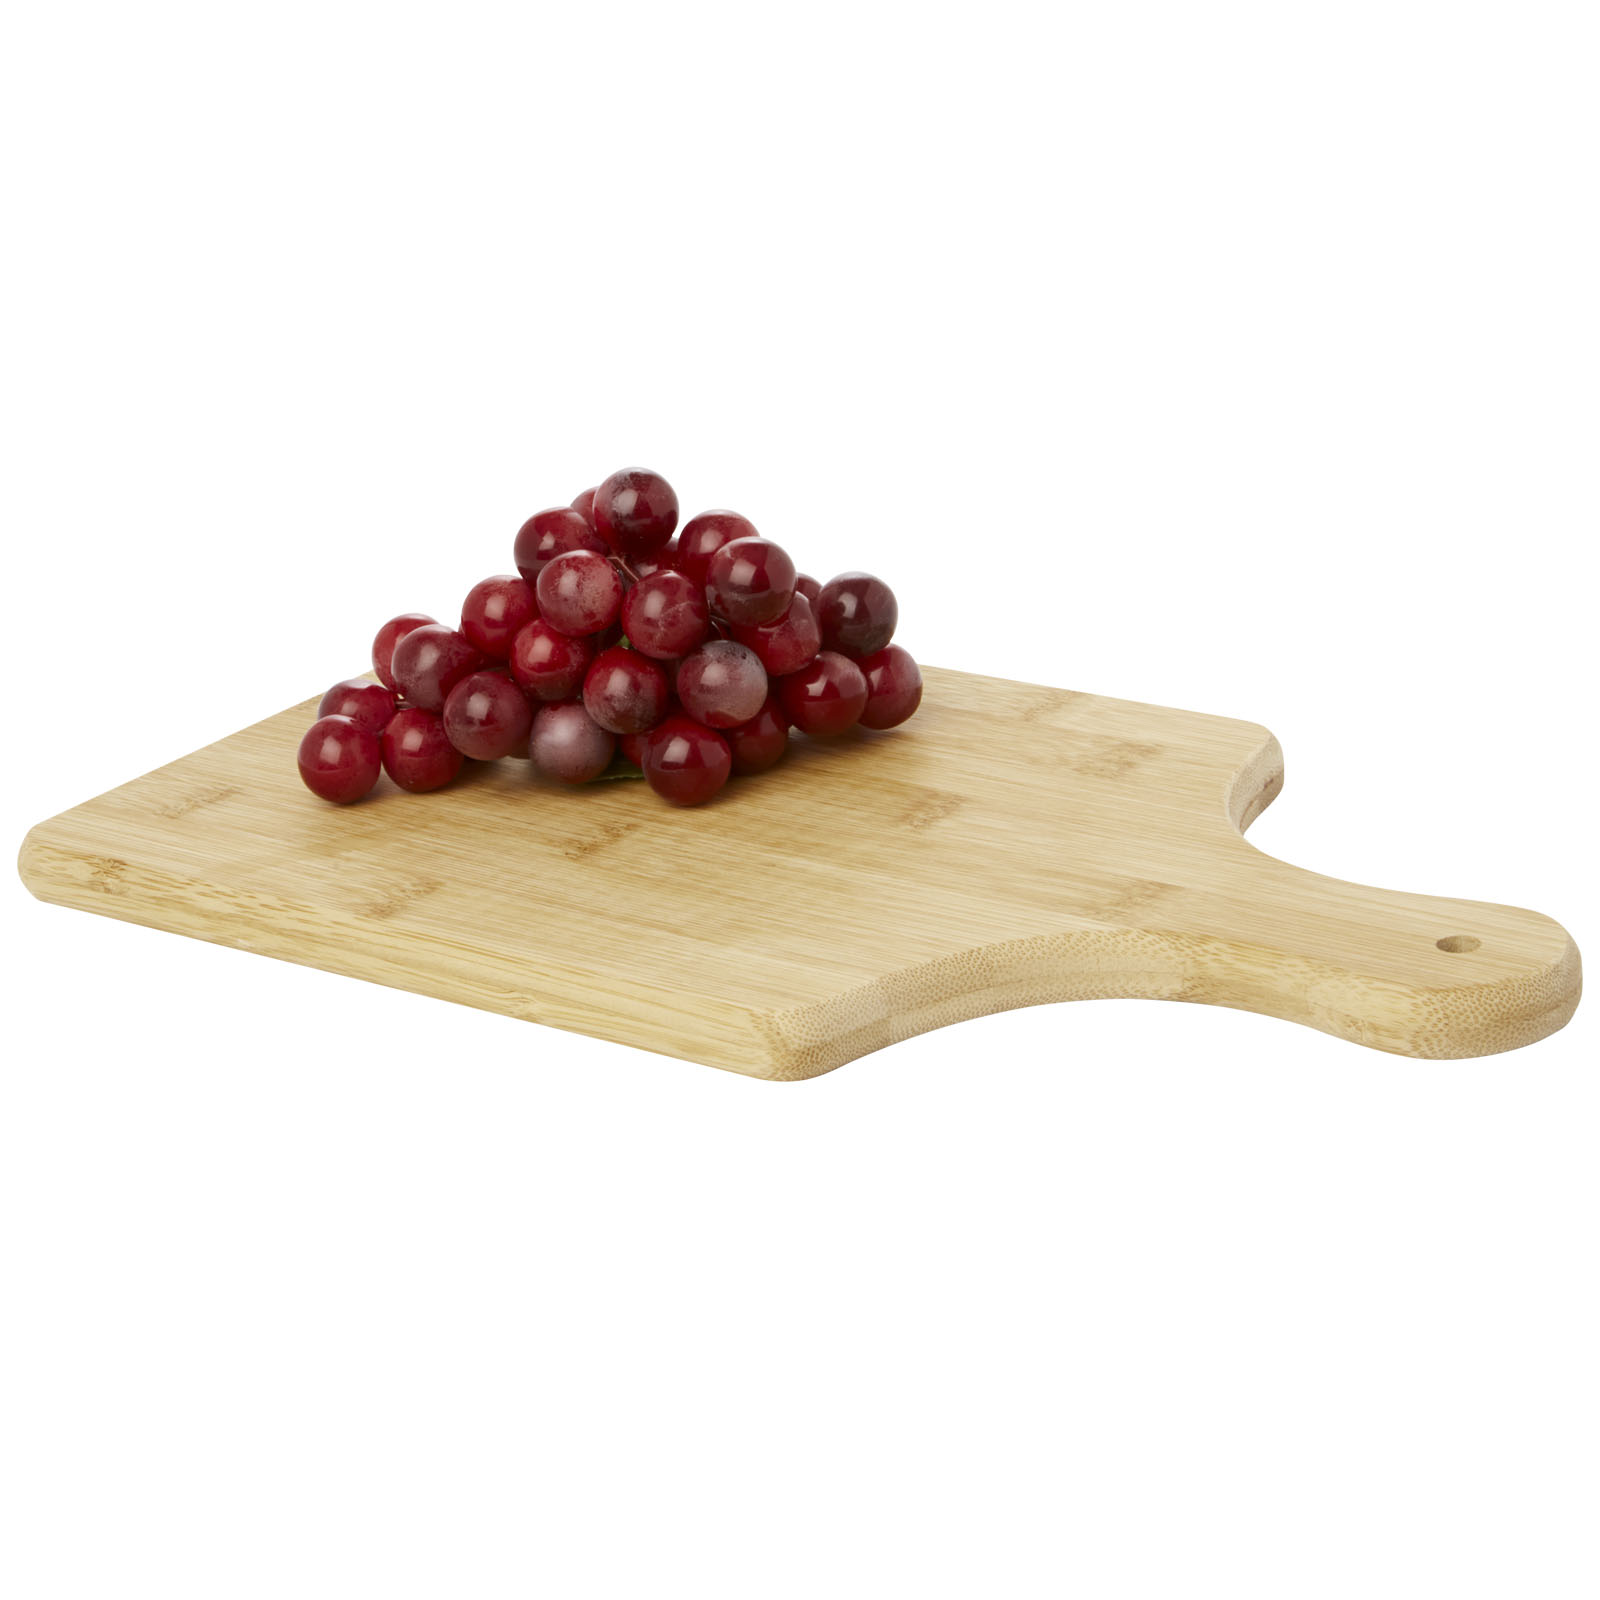 Advertising Cutting Boards - Quimet bamboo cutting board - 0